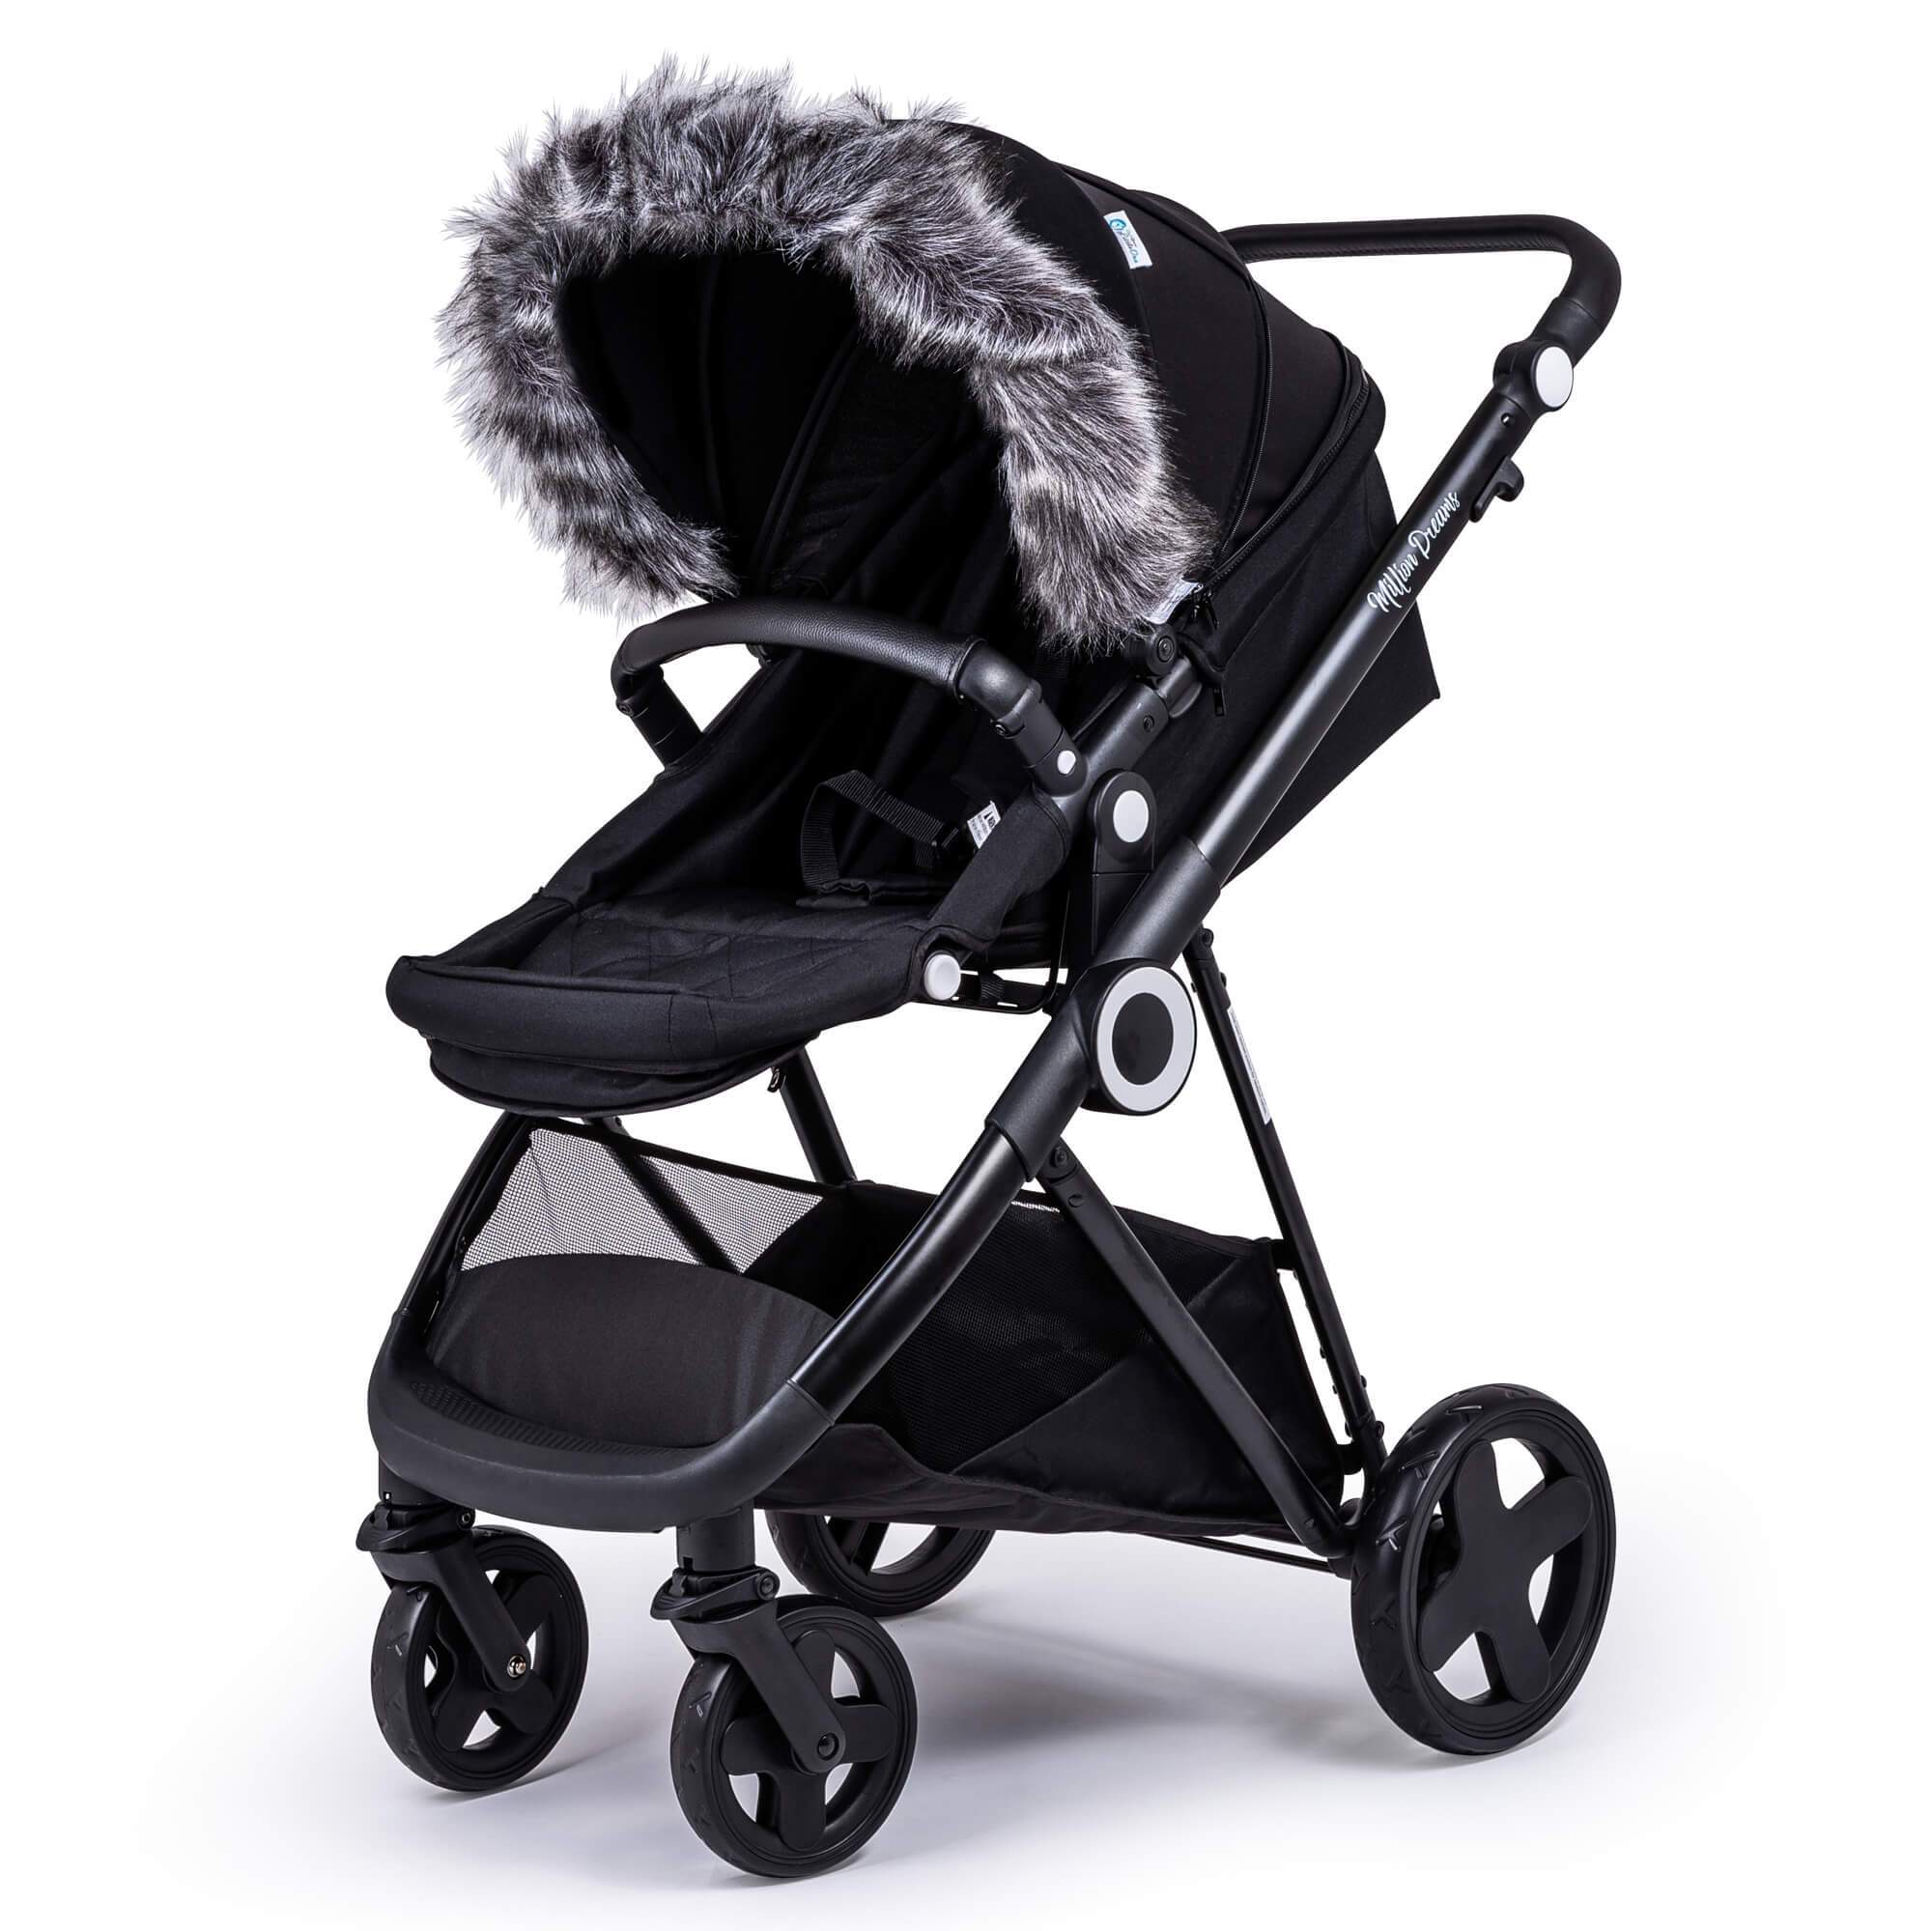 Pram Fur Hood Trim Attachment for Pushchair Compatible with Norton - Dark Grey / Fits All Models | For Your Little One